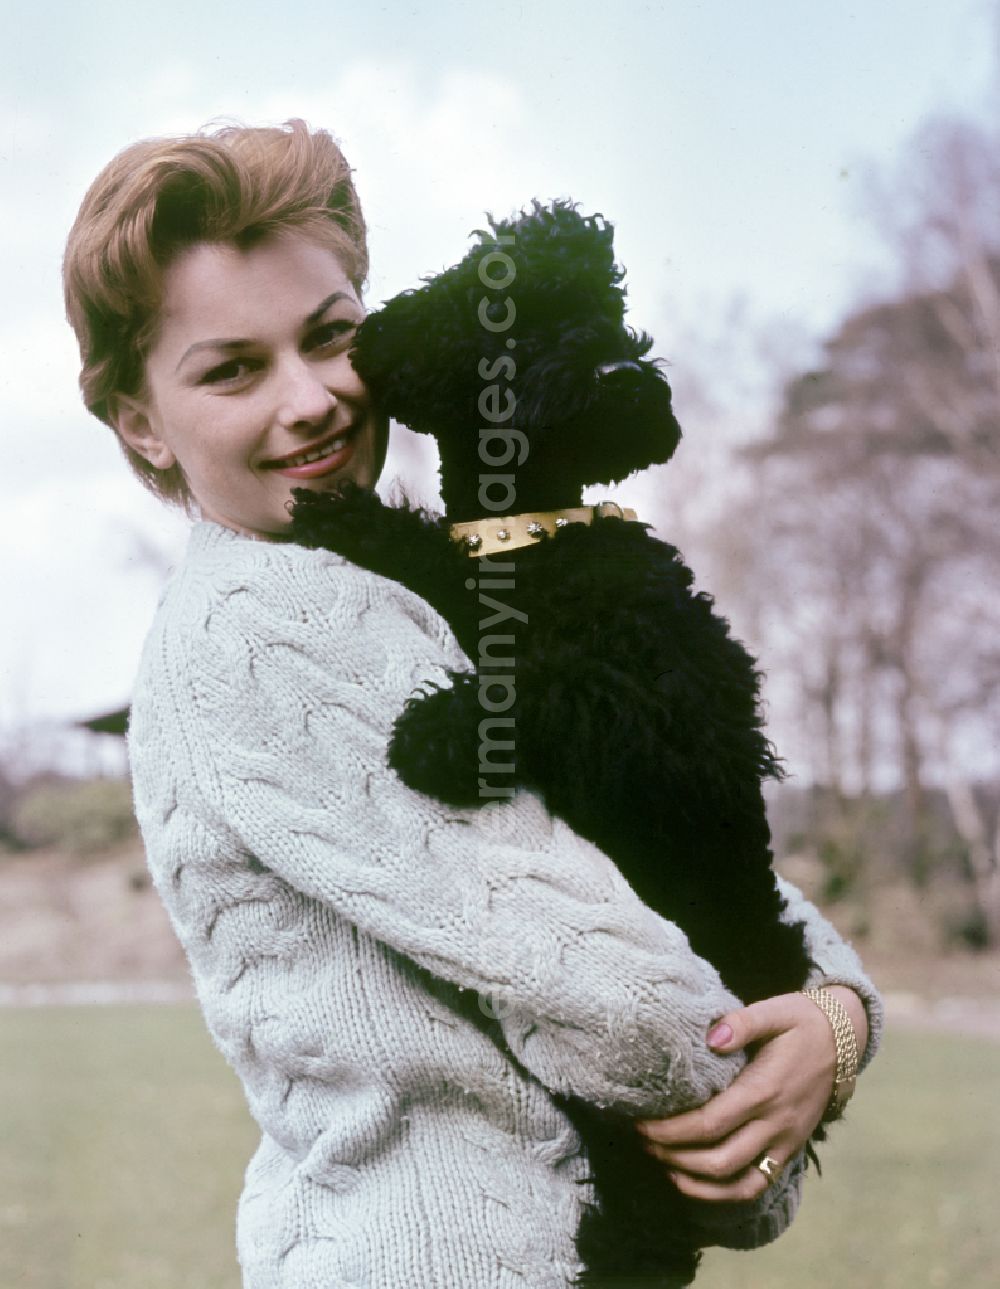 Berlin: Actress Christine Laszar with poodle in the park in East Berlin on the territory of the former GDR, German Democratic Republic